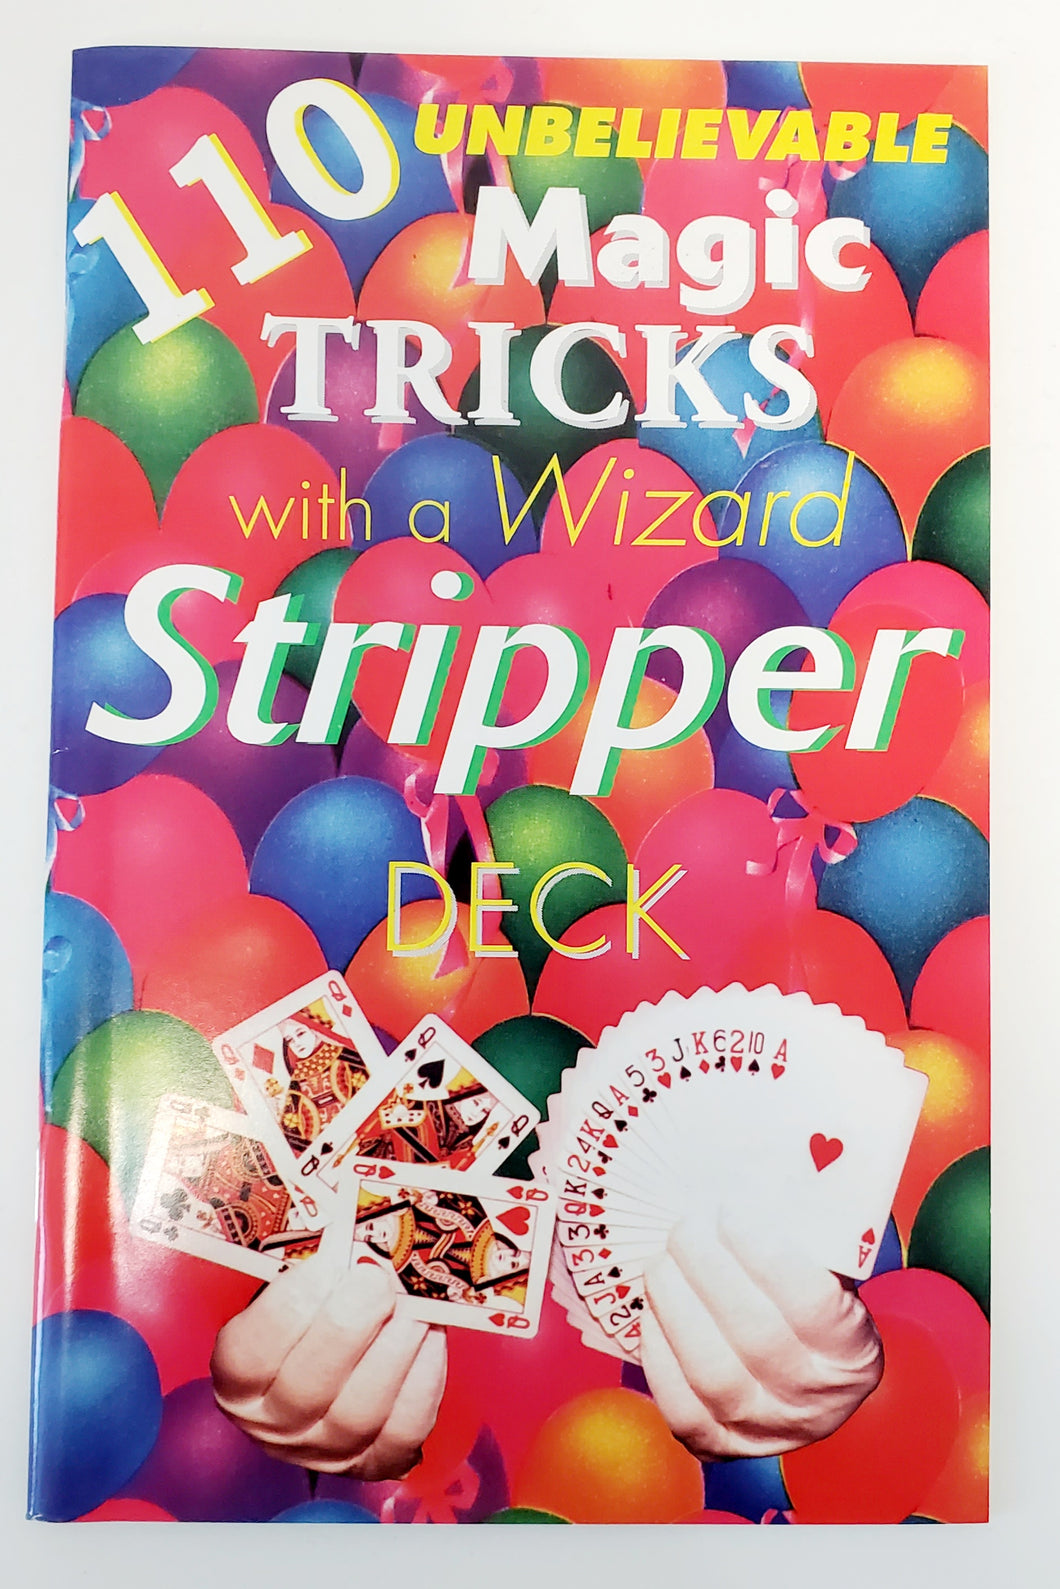 110 Unbelievable Magic Tricks with a Stripper Deck - paperback book